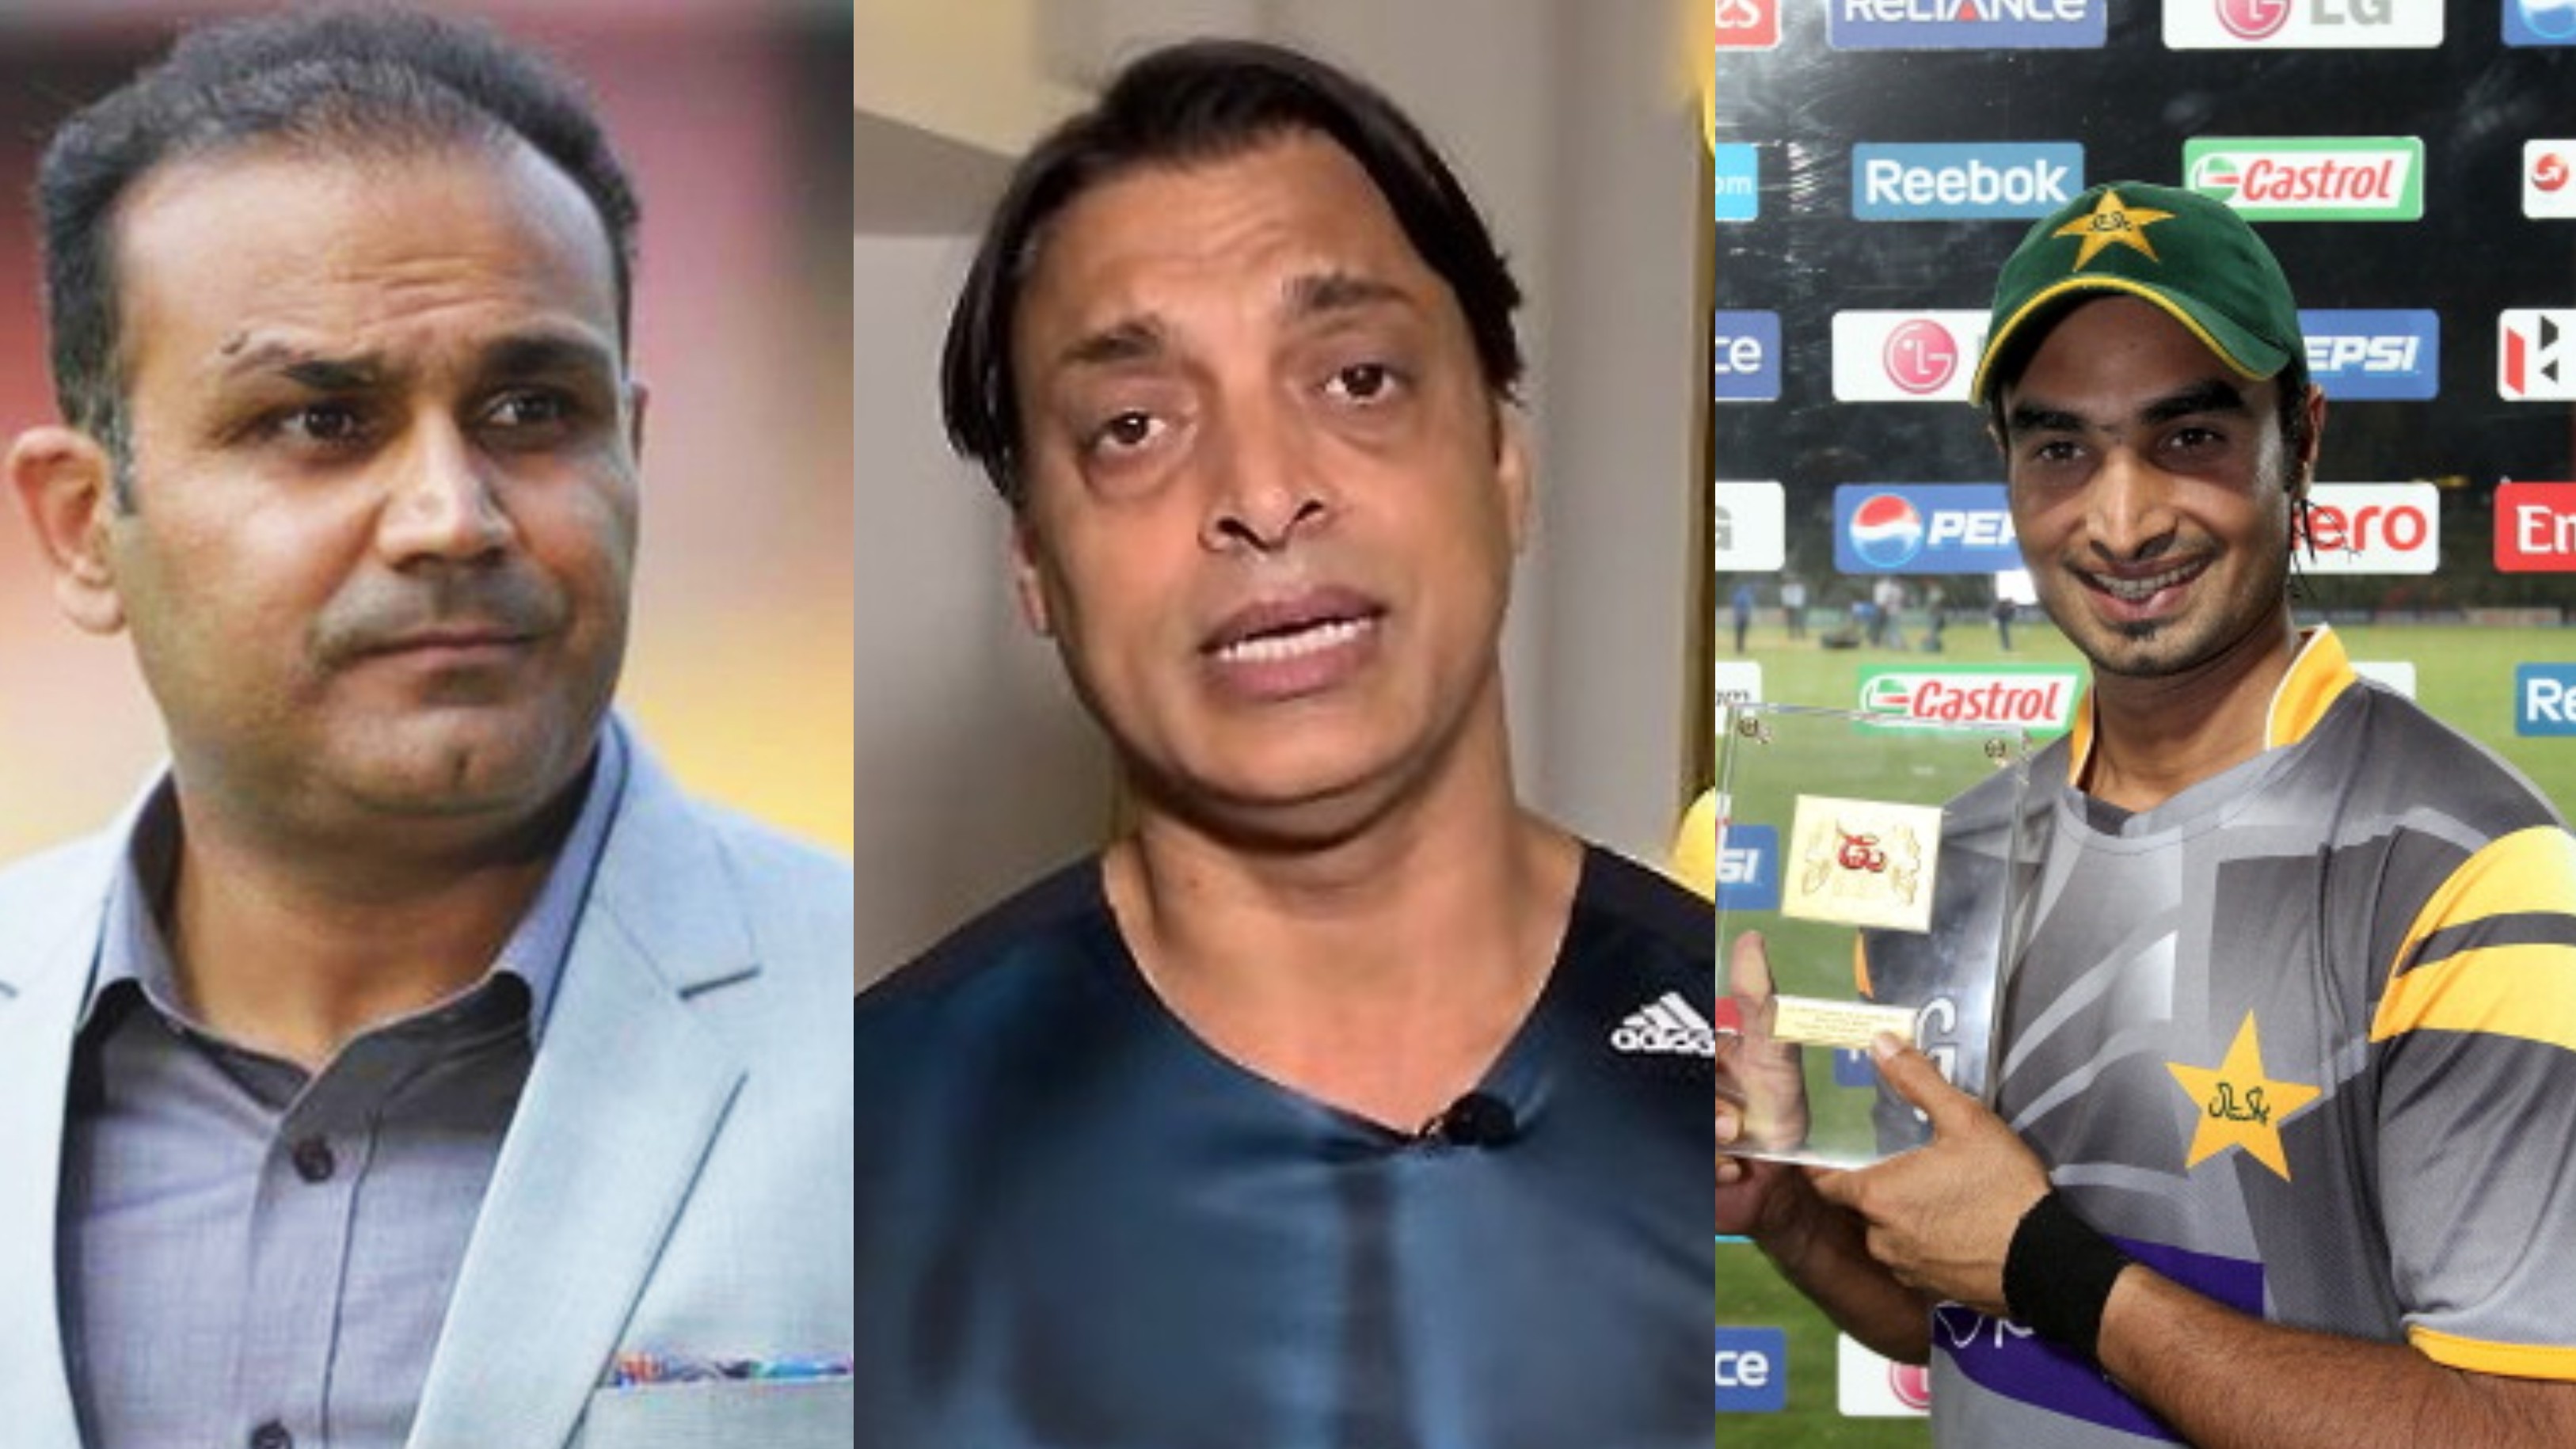 Shoaib Akhtar claims Imran Nazir was more talented than Virender Sehwag